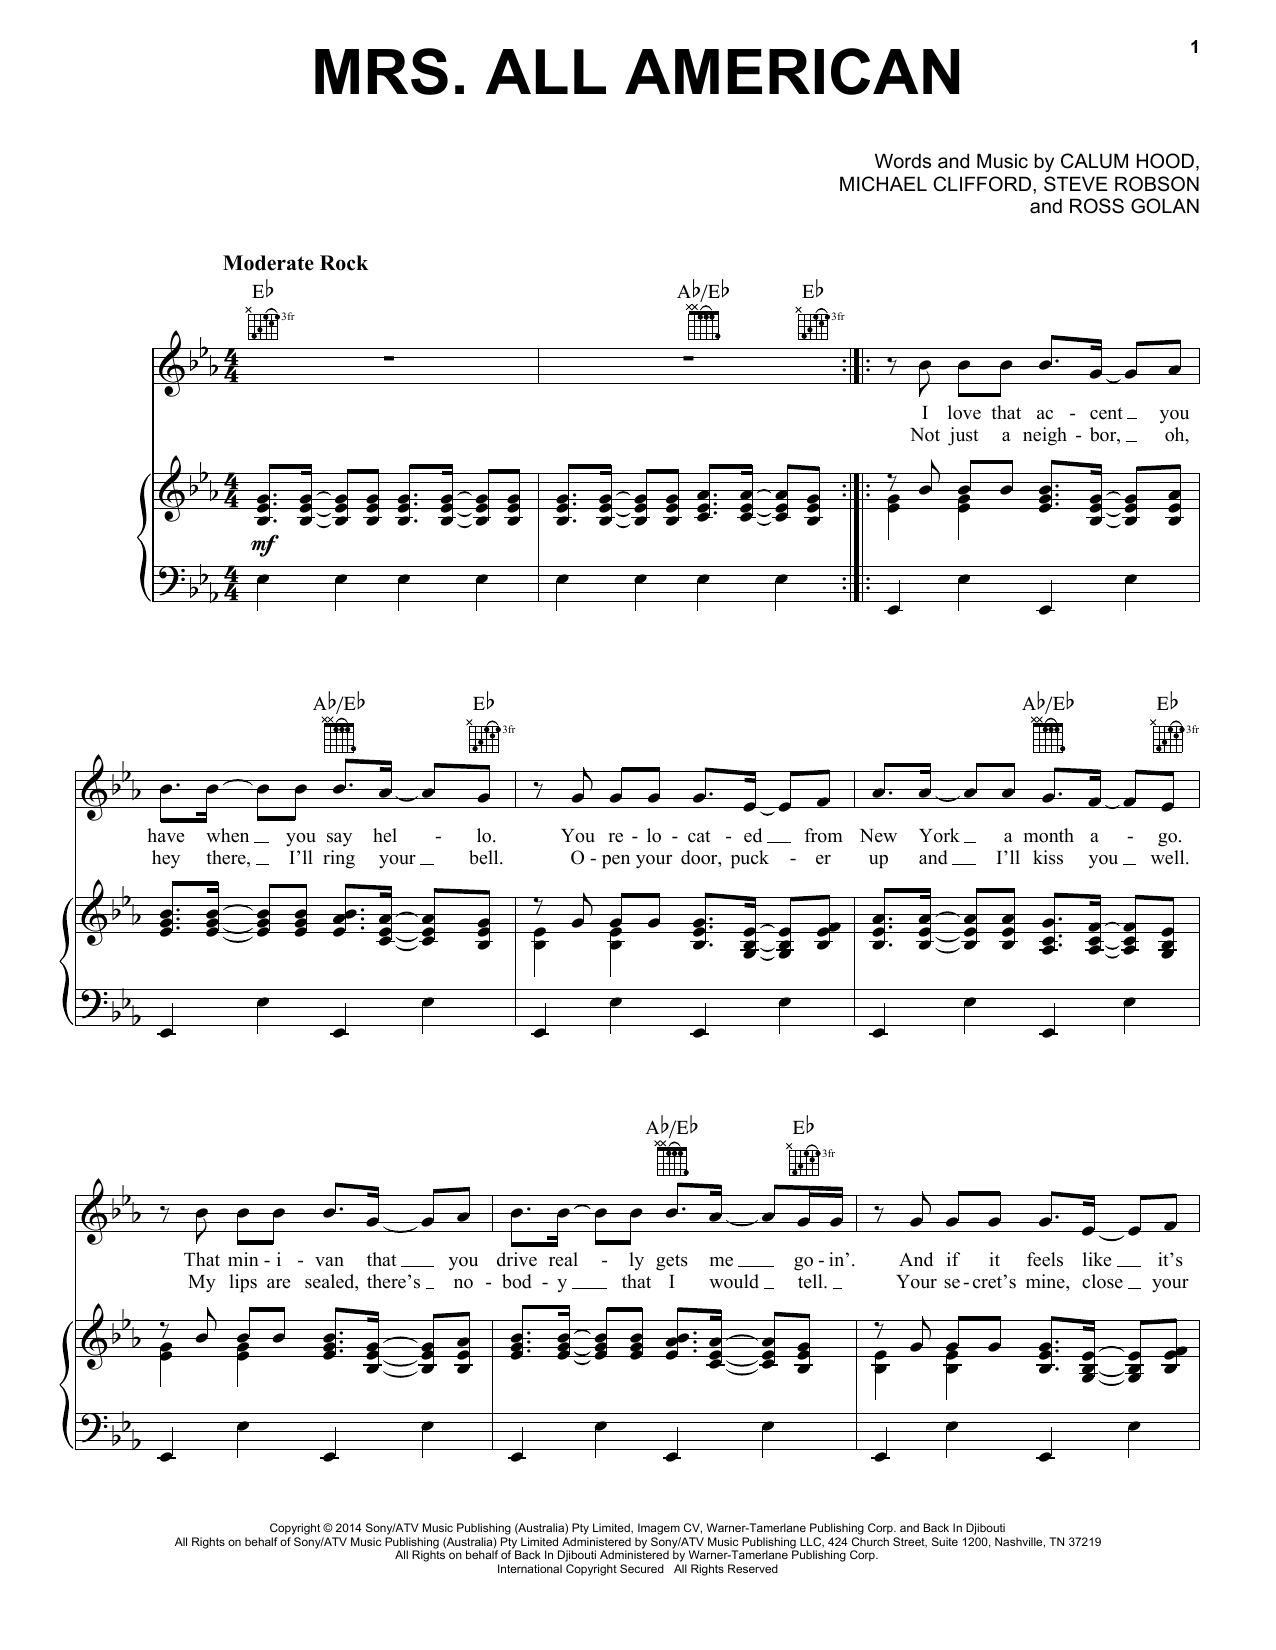 Download 5 Seconds of Summer Mrs. All American Sheet Music